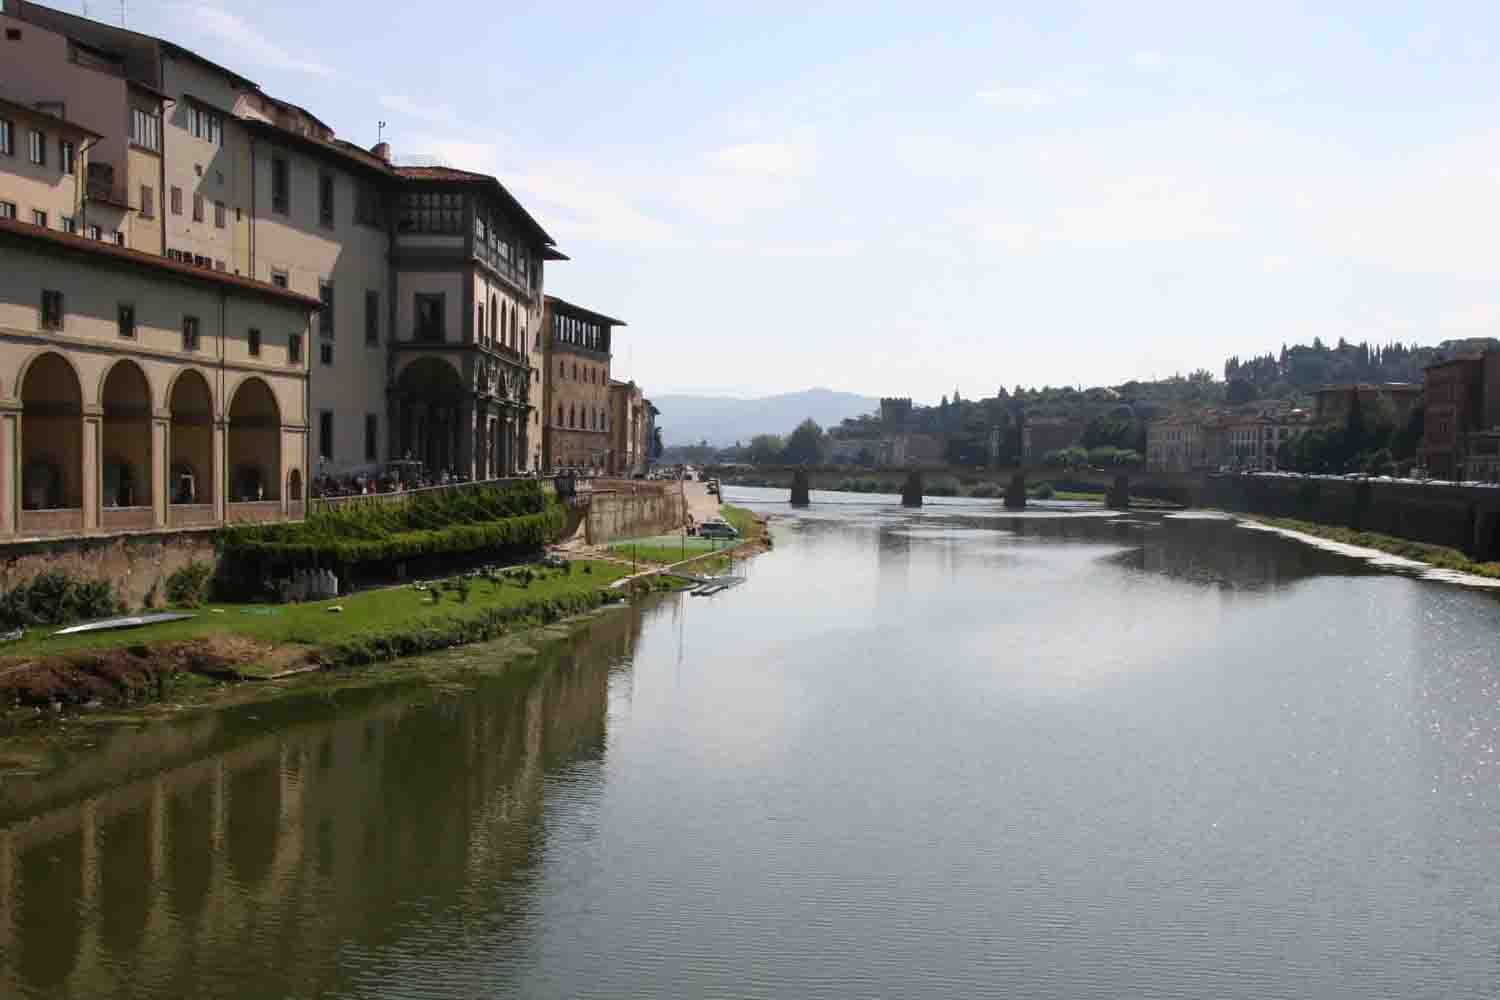 view of the Arno River